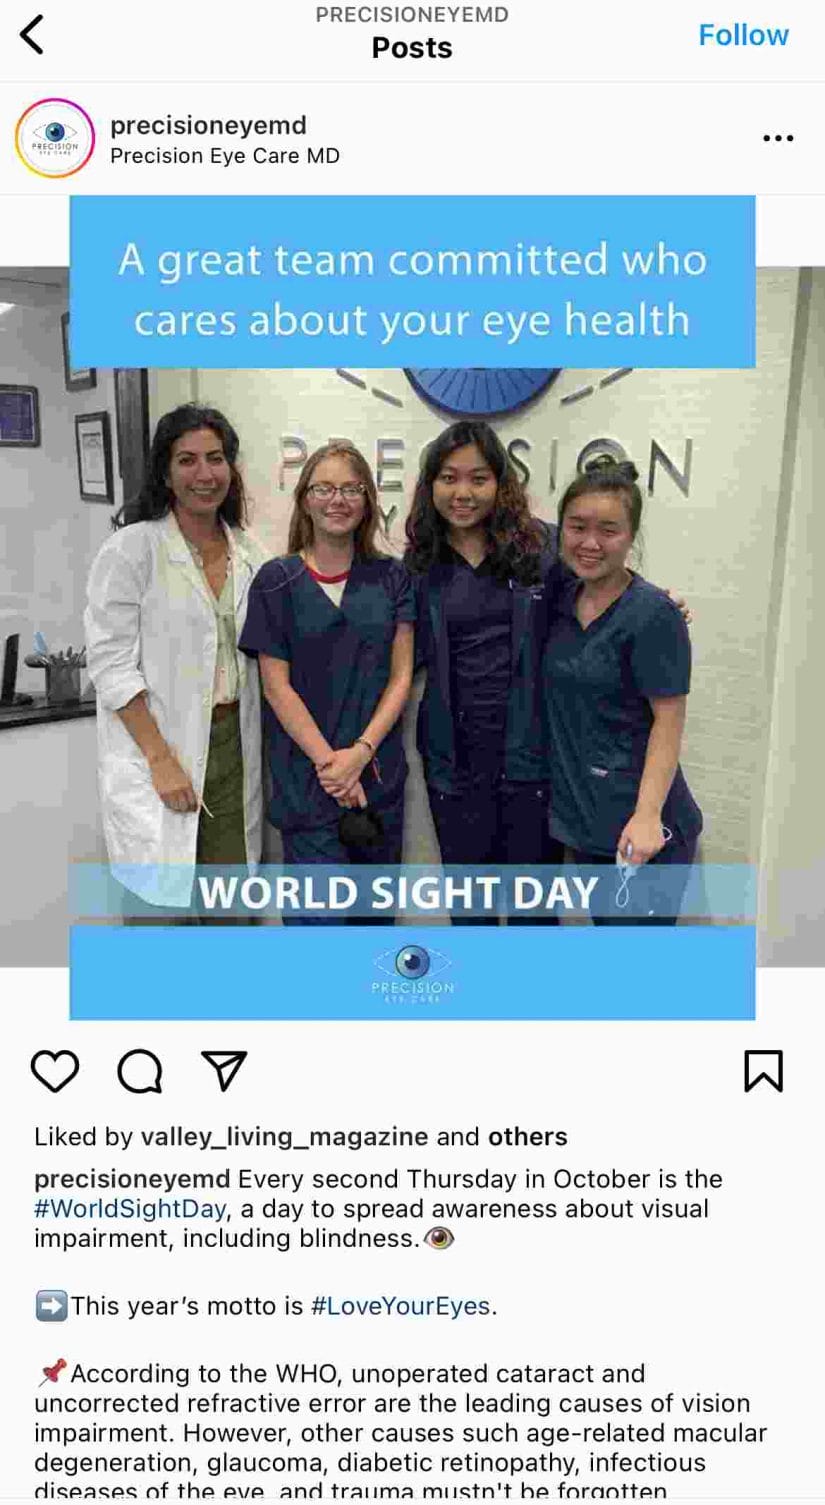 Season's greetings from an optometry center's staff